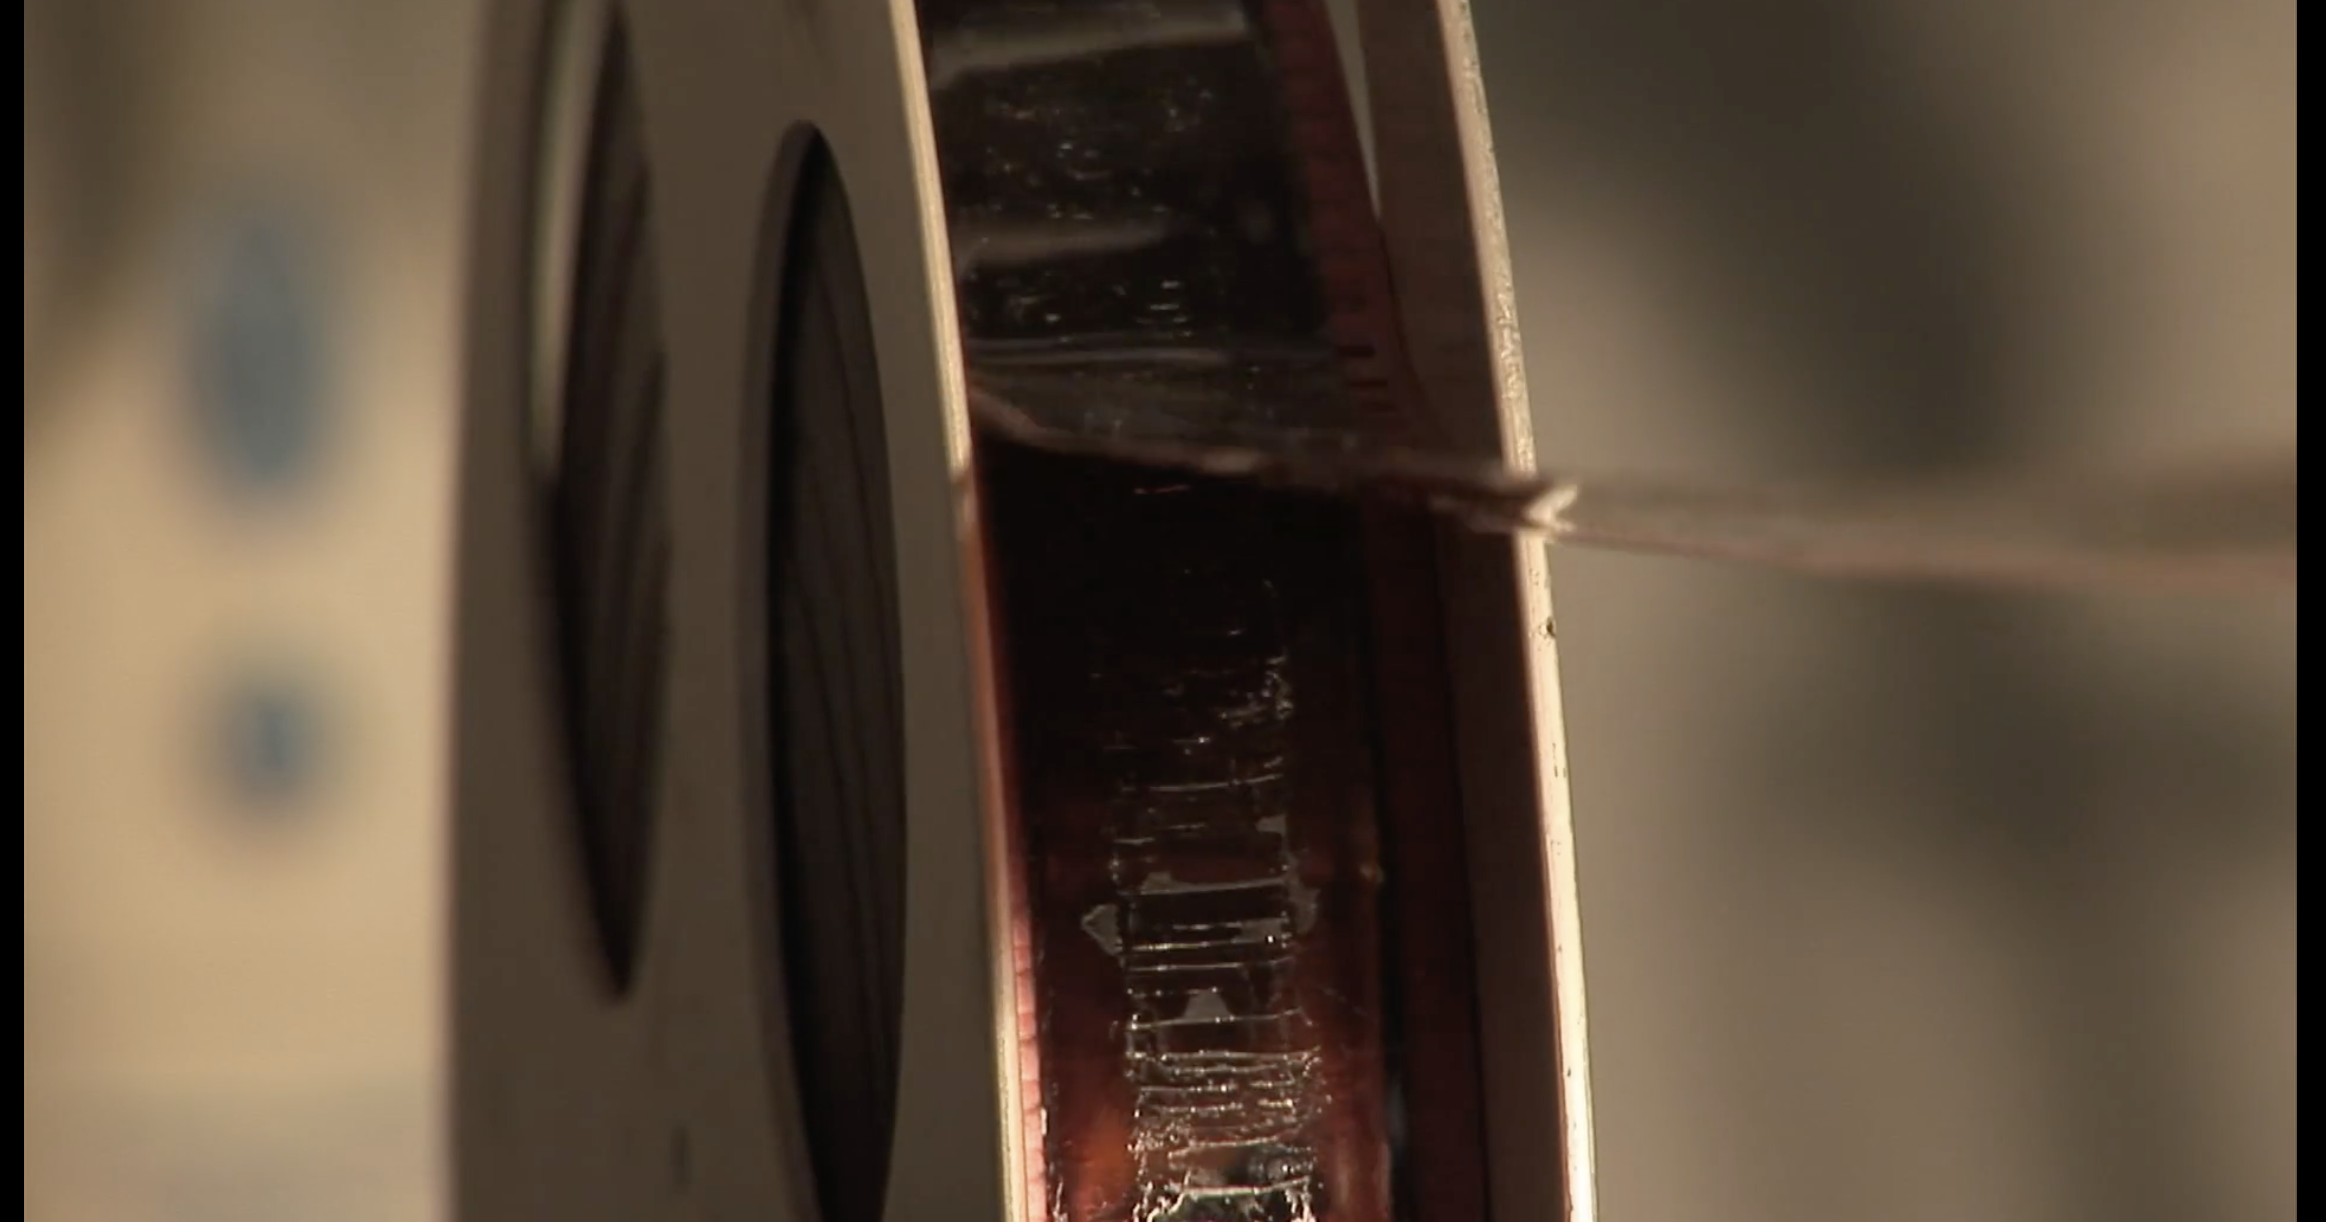 this reel had extensive deterioration